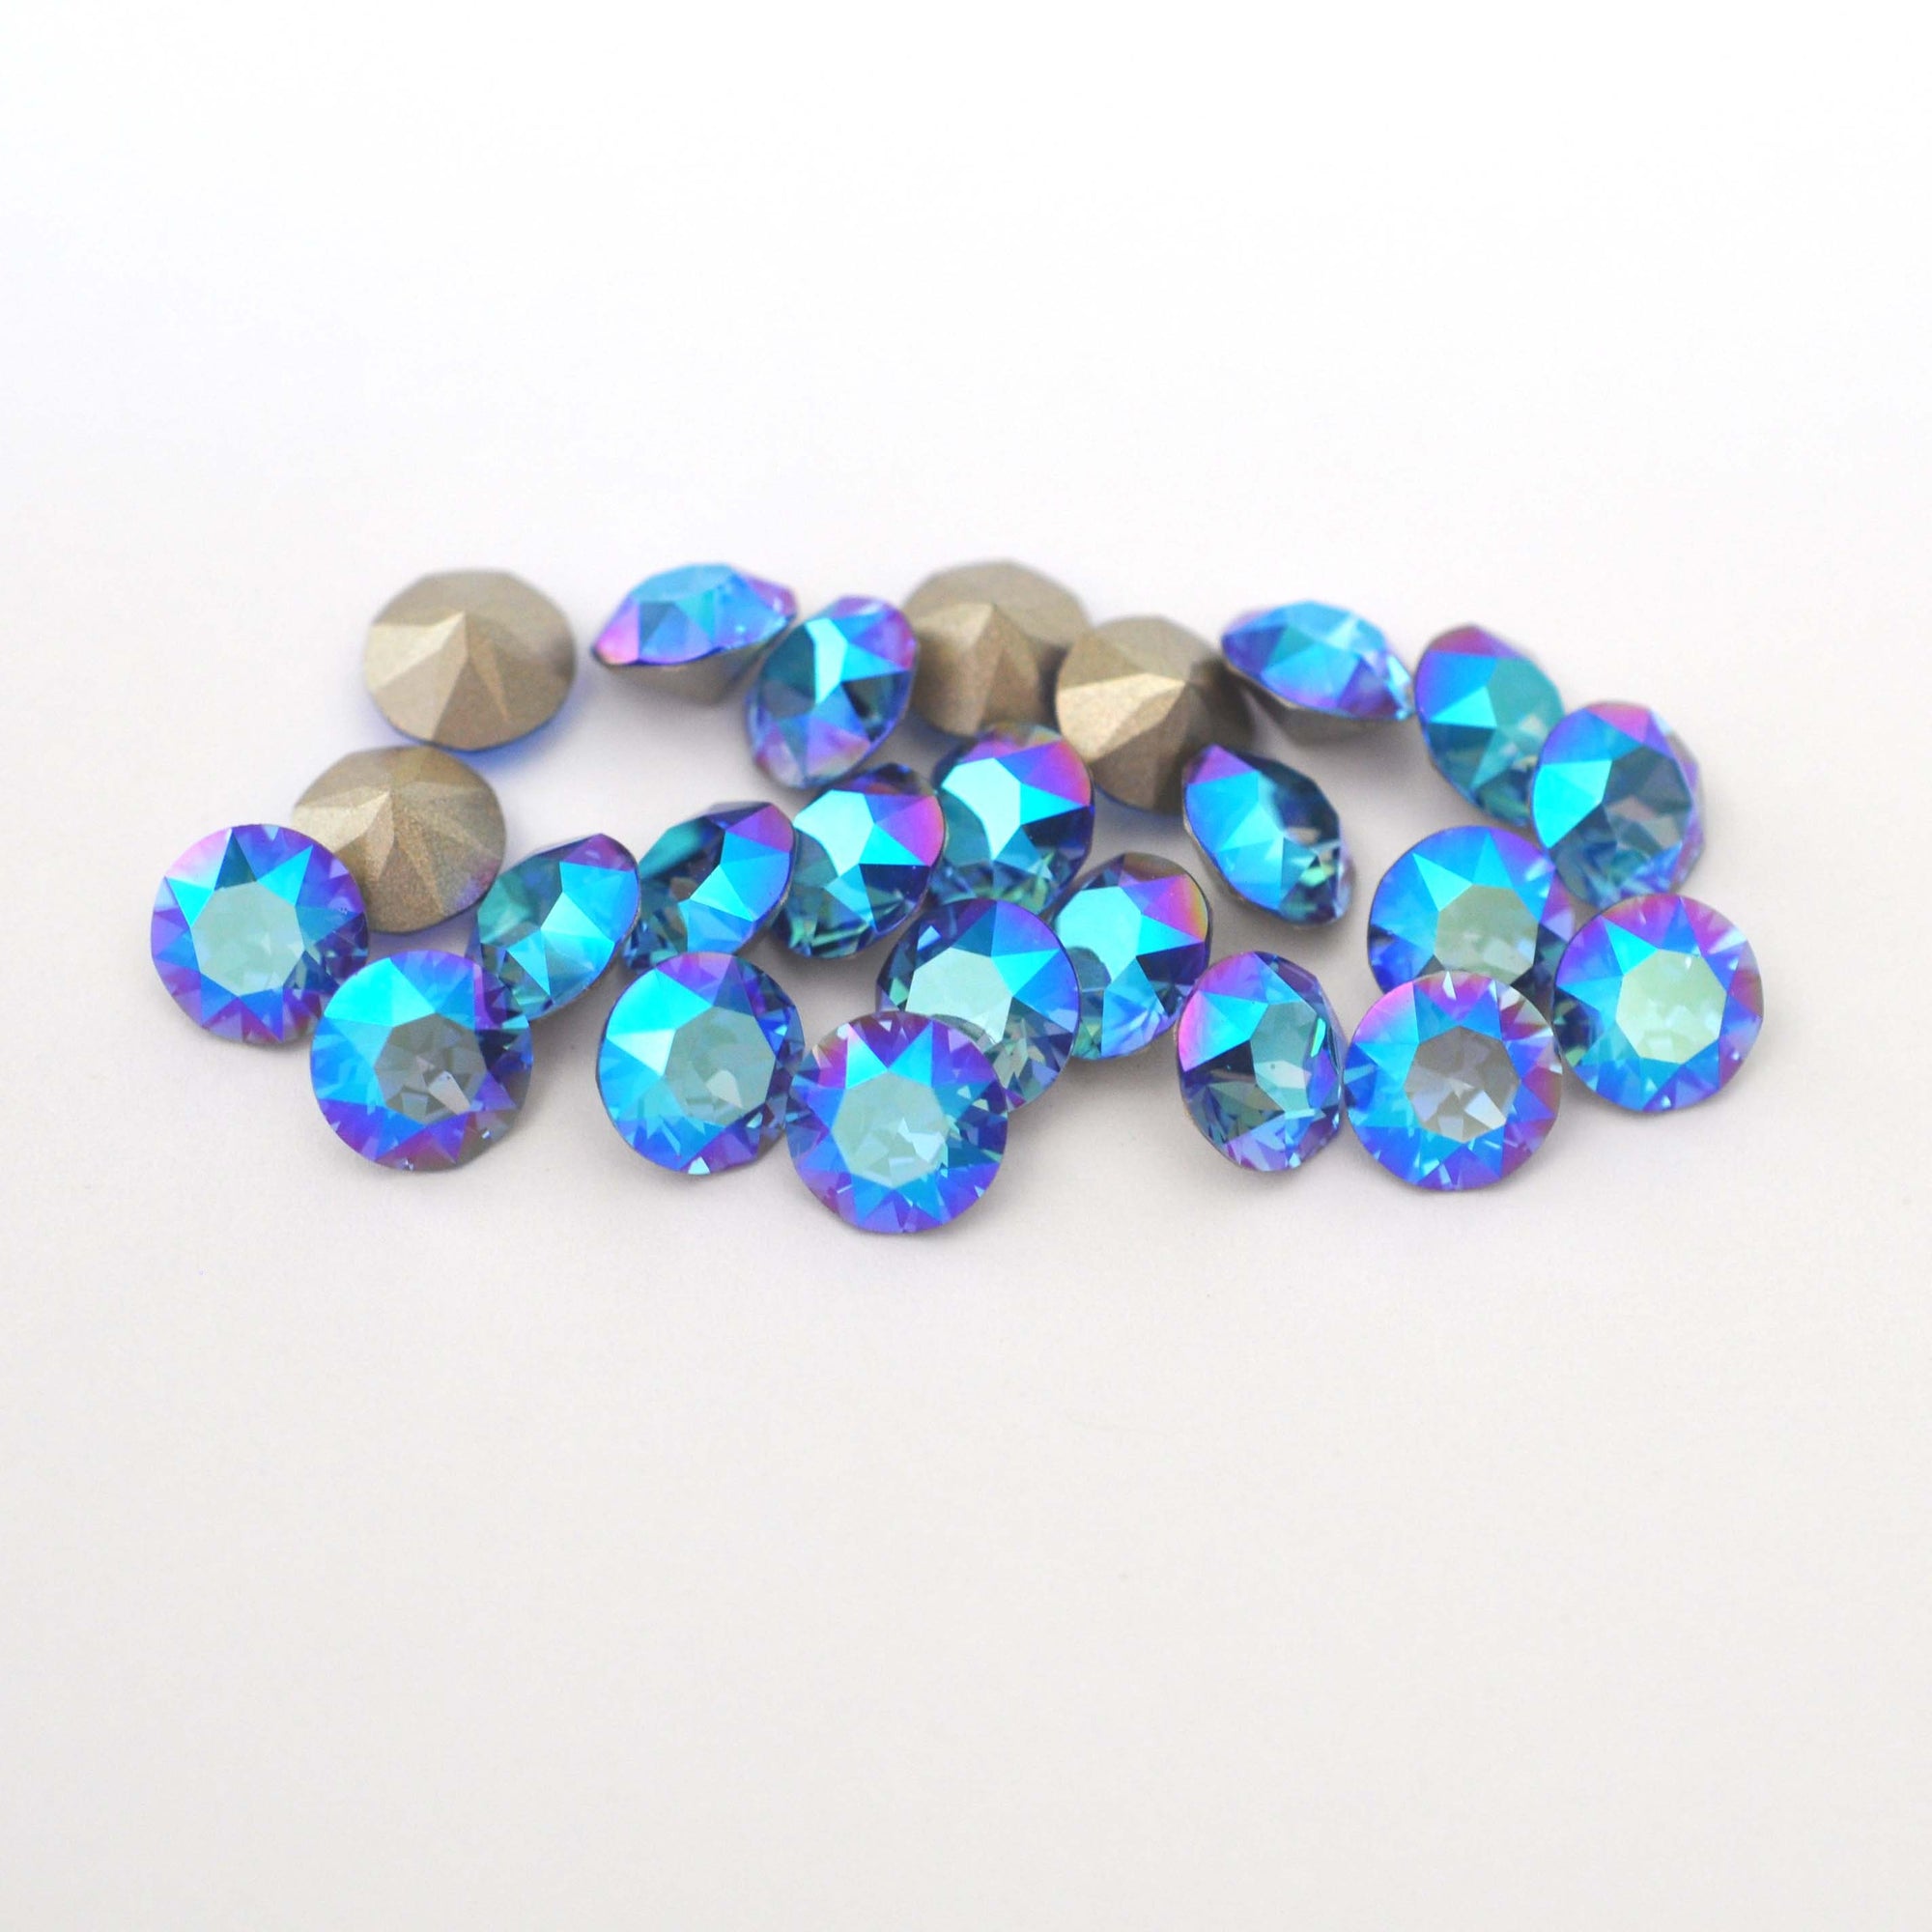 Sapphire Shimmer 1088 Pointed Back Chaton Barton Crystals 39ss, 8mm